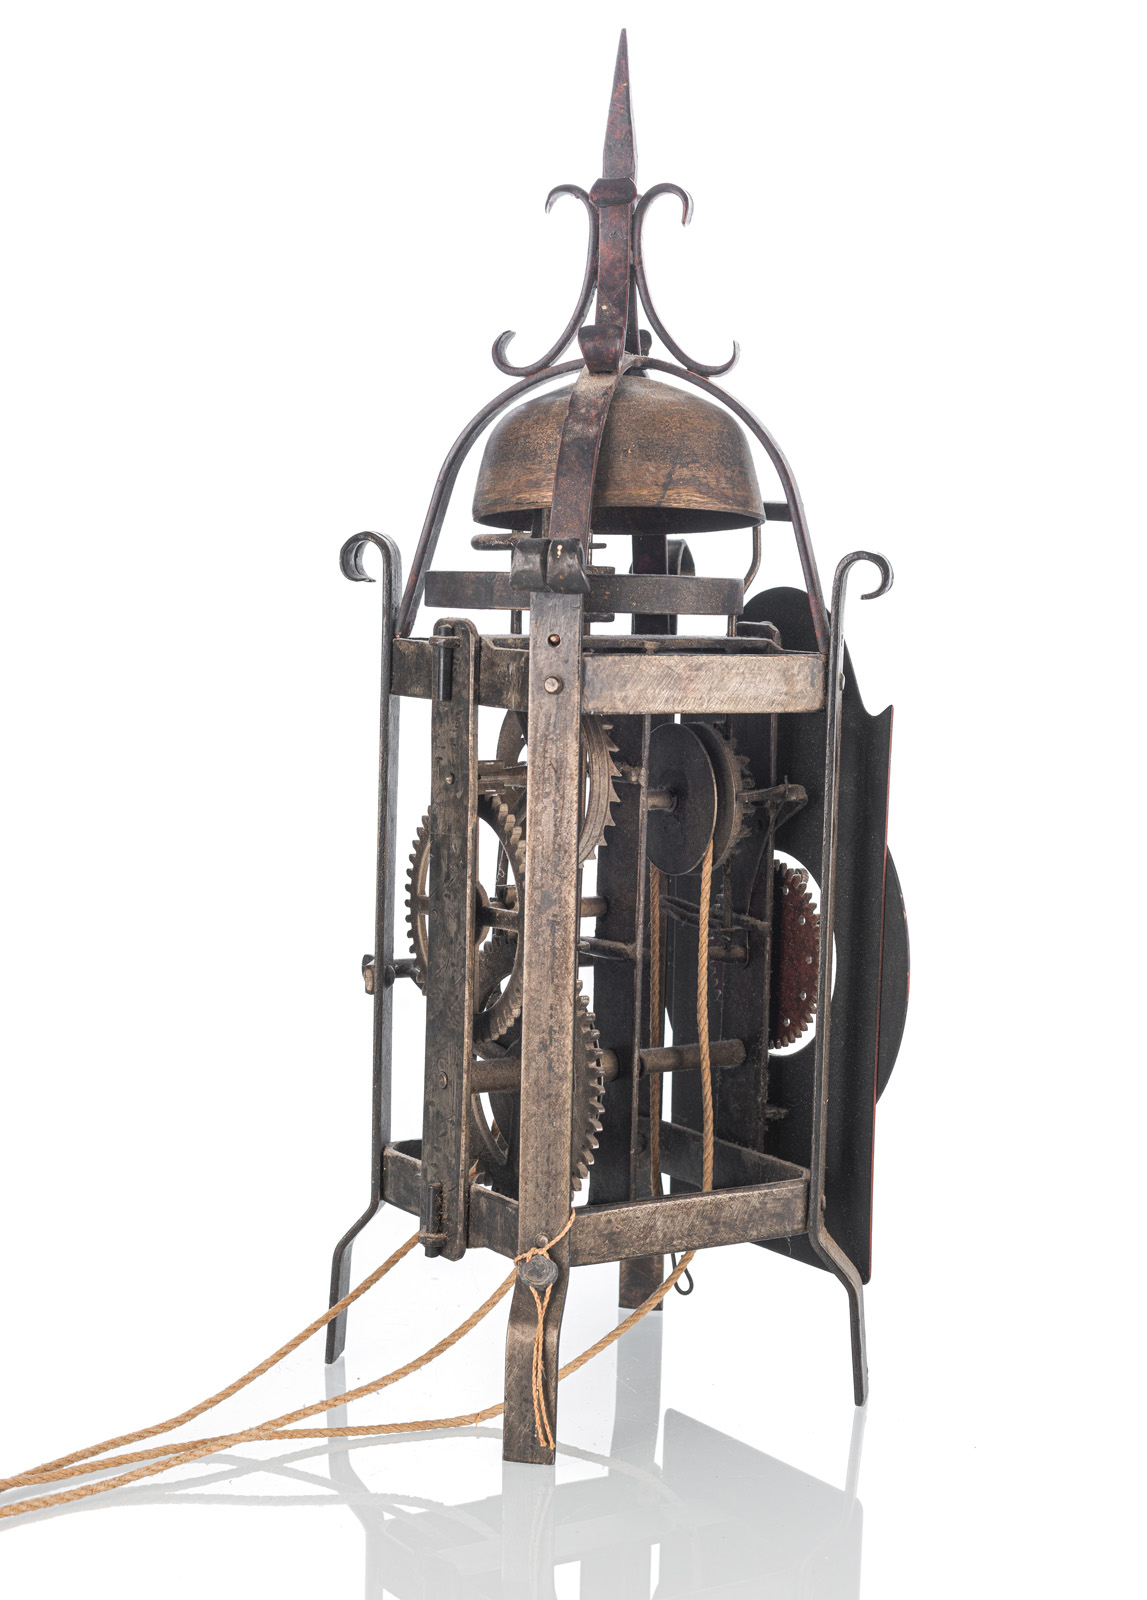 A GOTHIC STYLE ONE HAND LANTERN CLOCK - Image 3 of 3